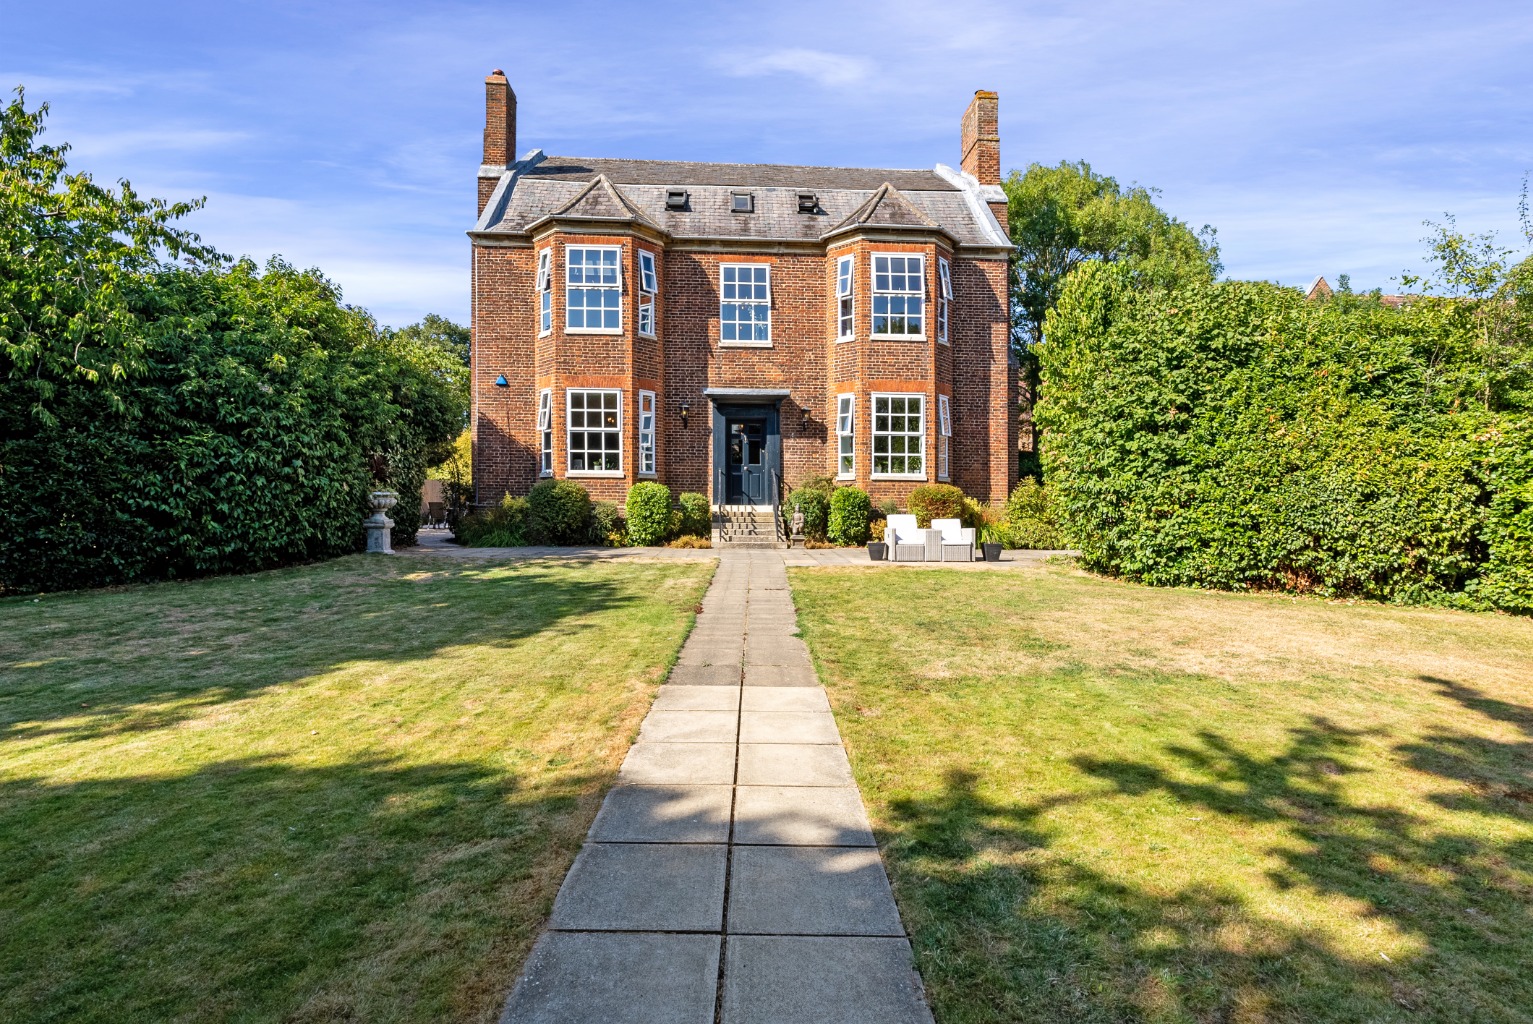 If you are looking for a home with the wow factor, then Grove House might just be the one for you. With an almost stately home appearance, this imposing and extremely spacious Georgian house has amazing curb appeal and is bursting with charm and character.